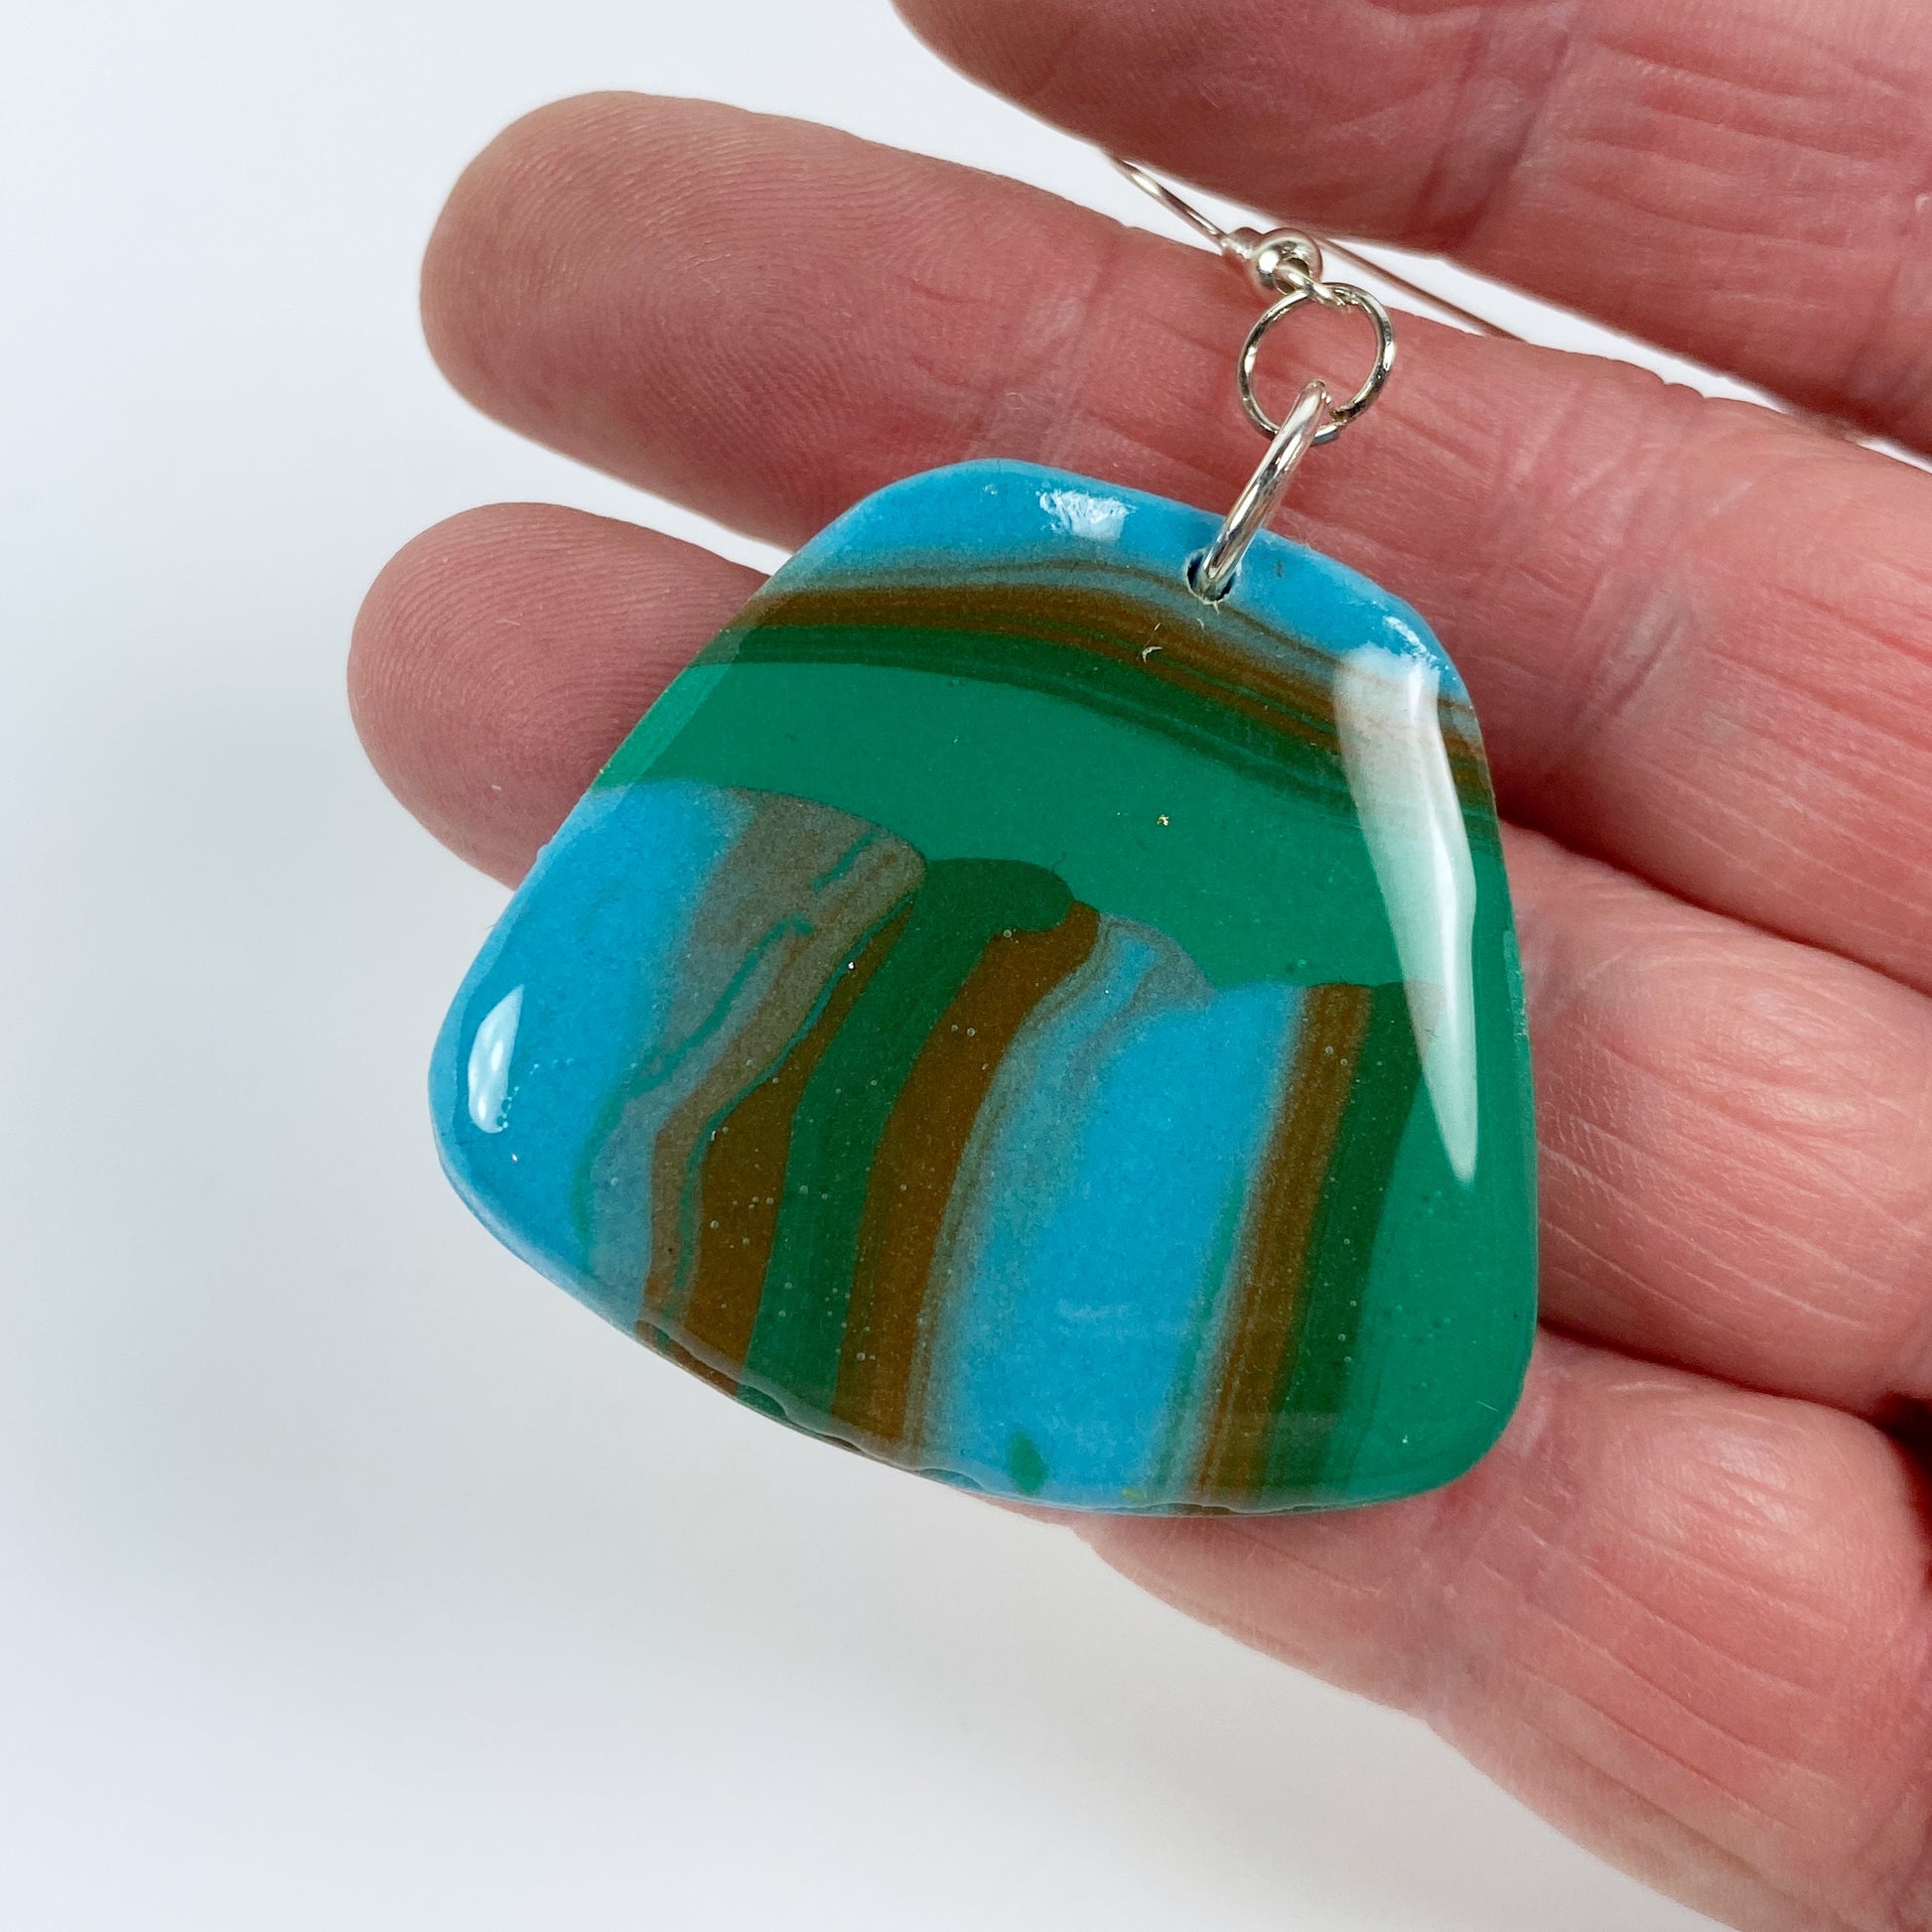 Hip Stripes Handmade Polymer Clay Dangle Earrings hand held for size reference